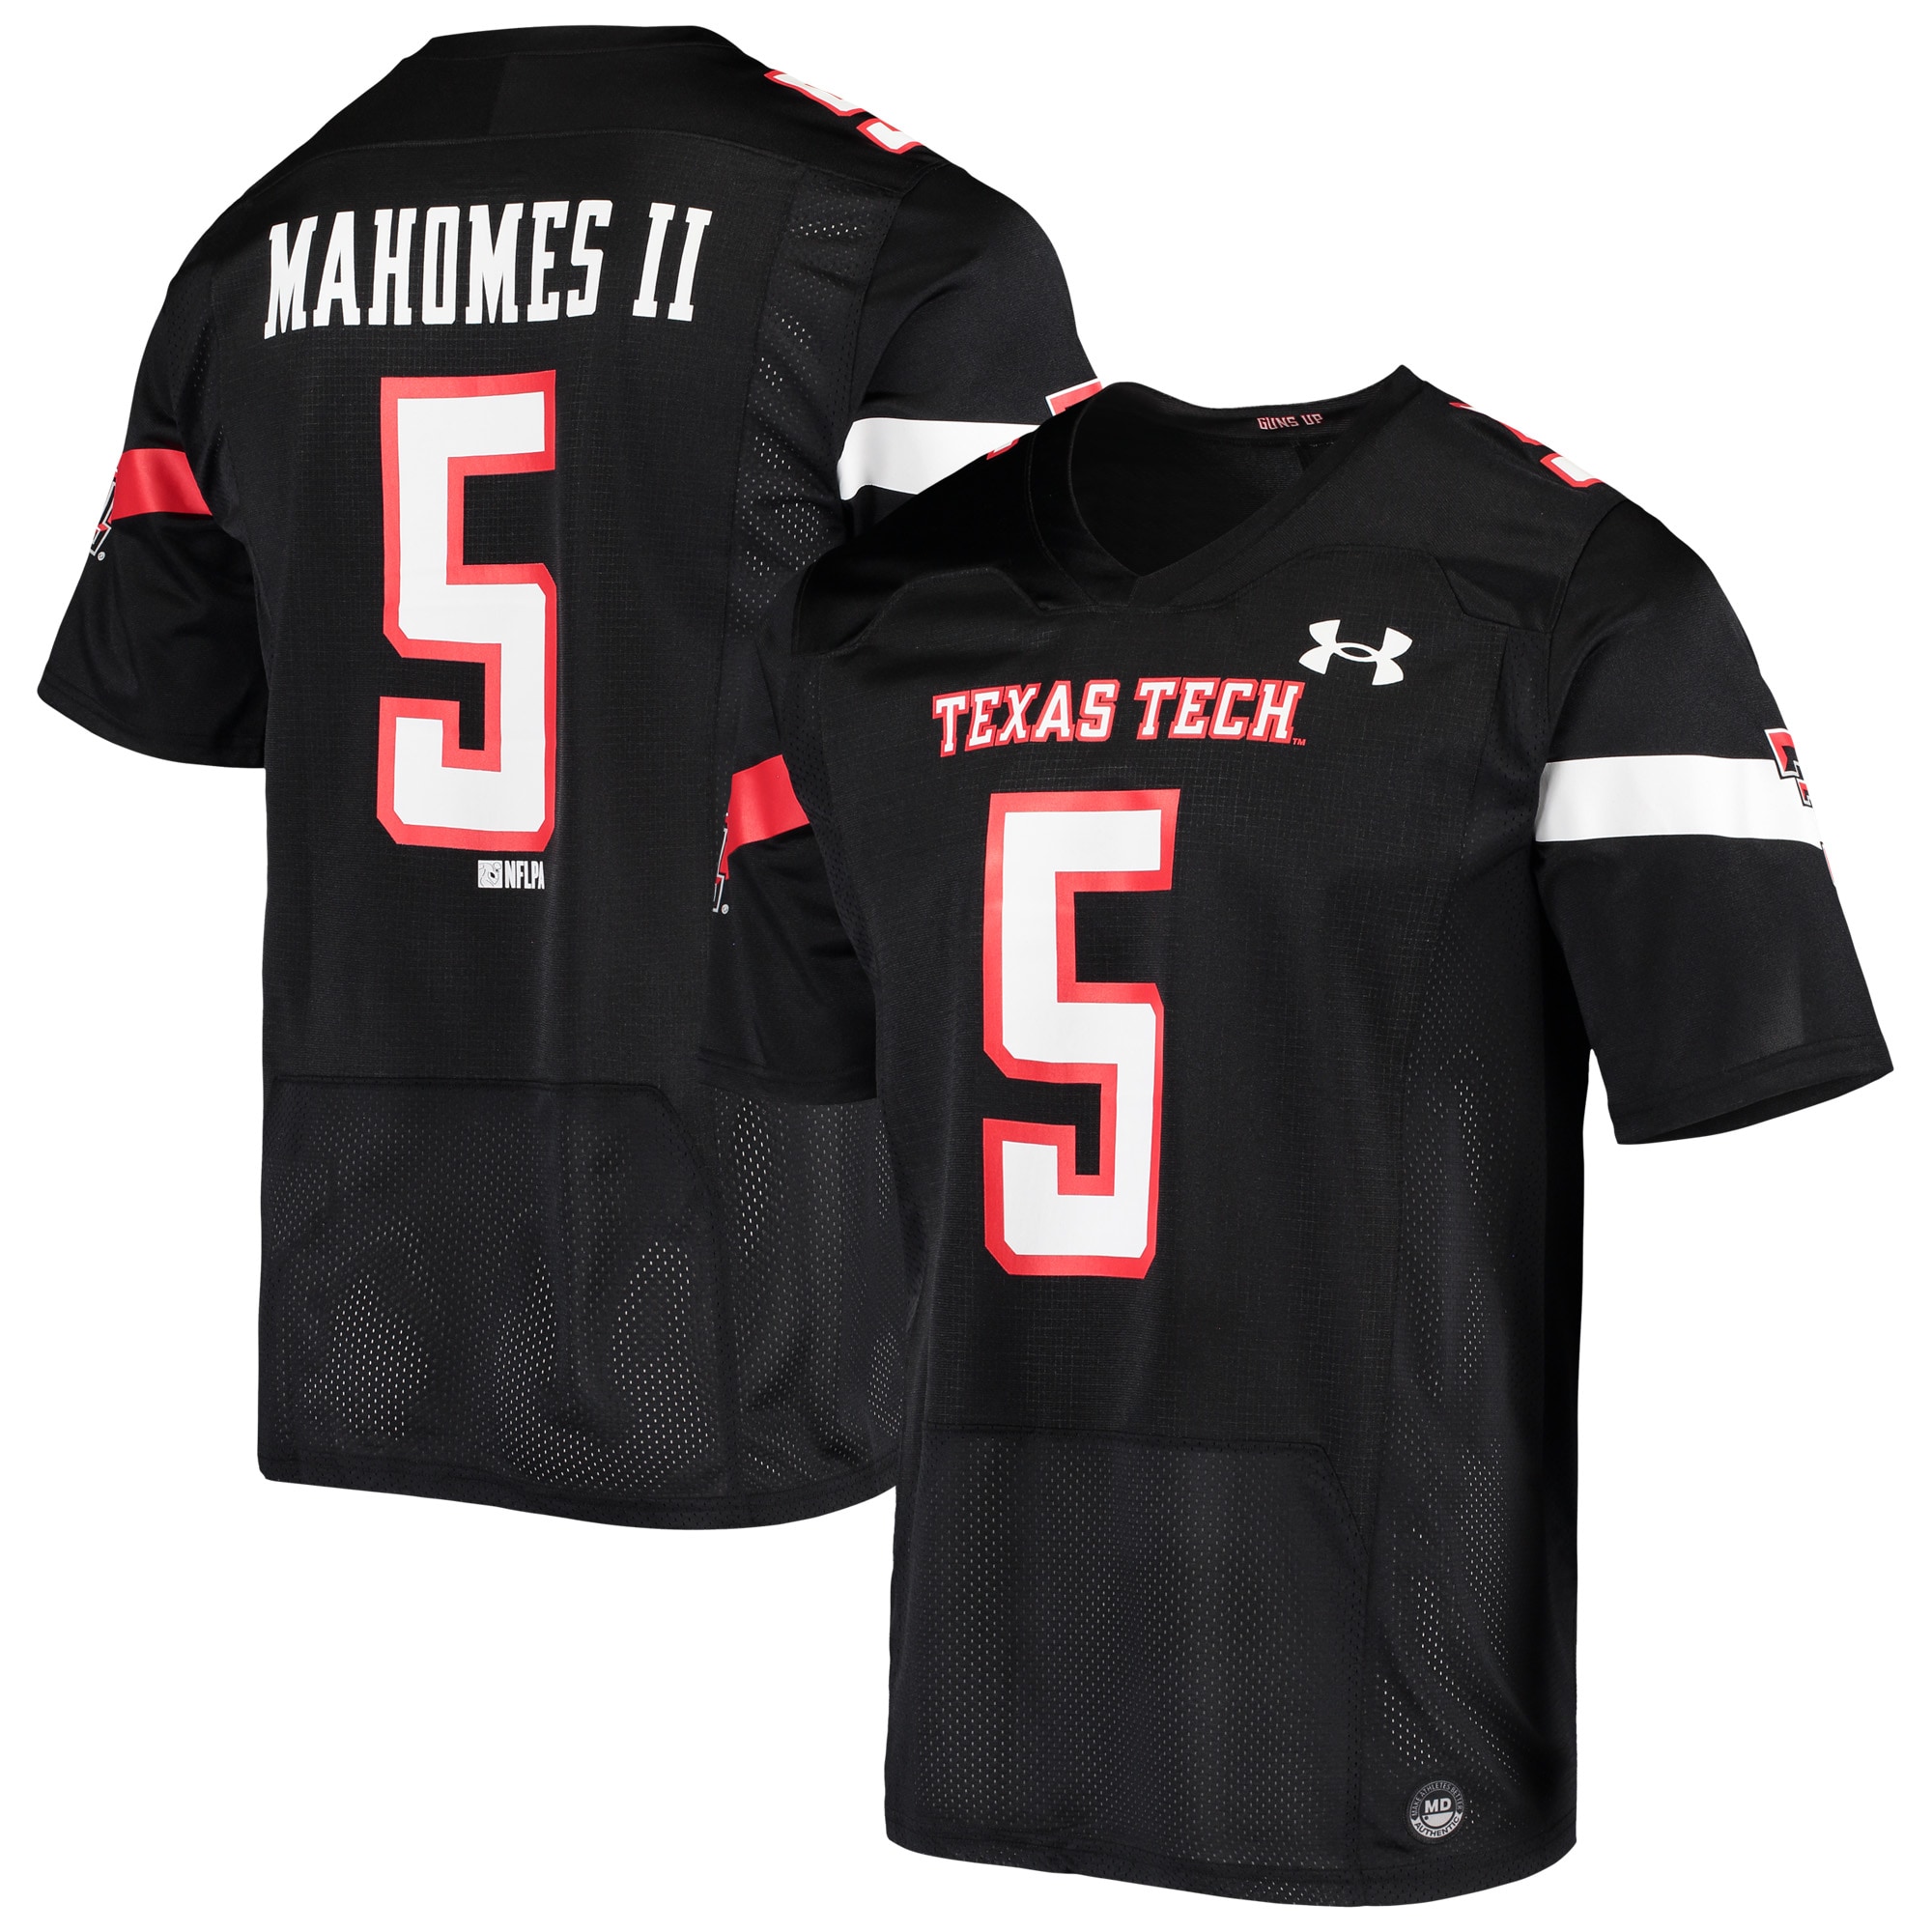 Patrick Mahomes Texas Tech Red Raiders Under Armour Team Replica Alumni Jersey - Black For Youth Women Men